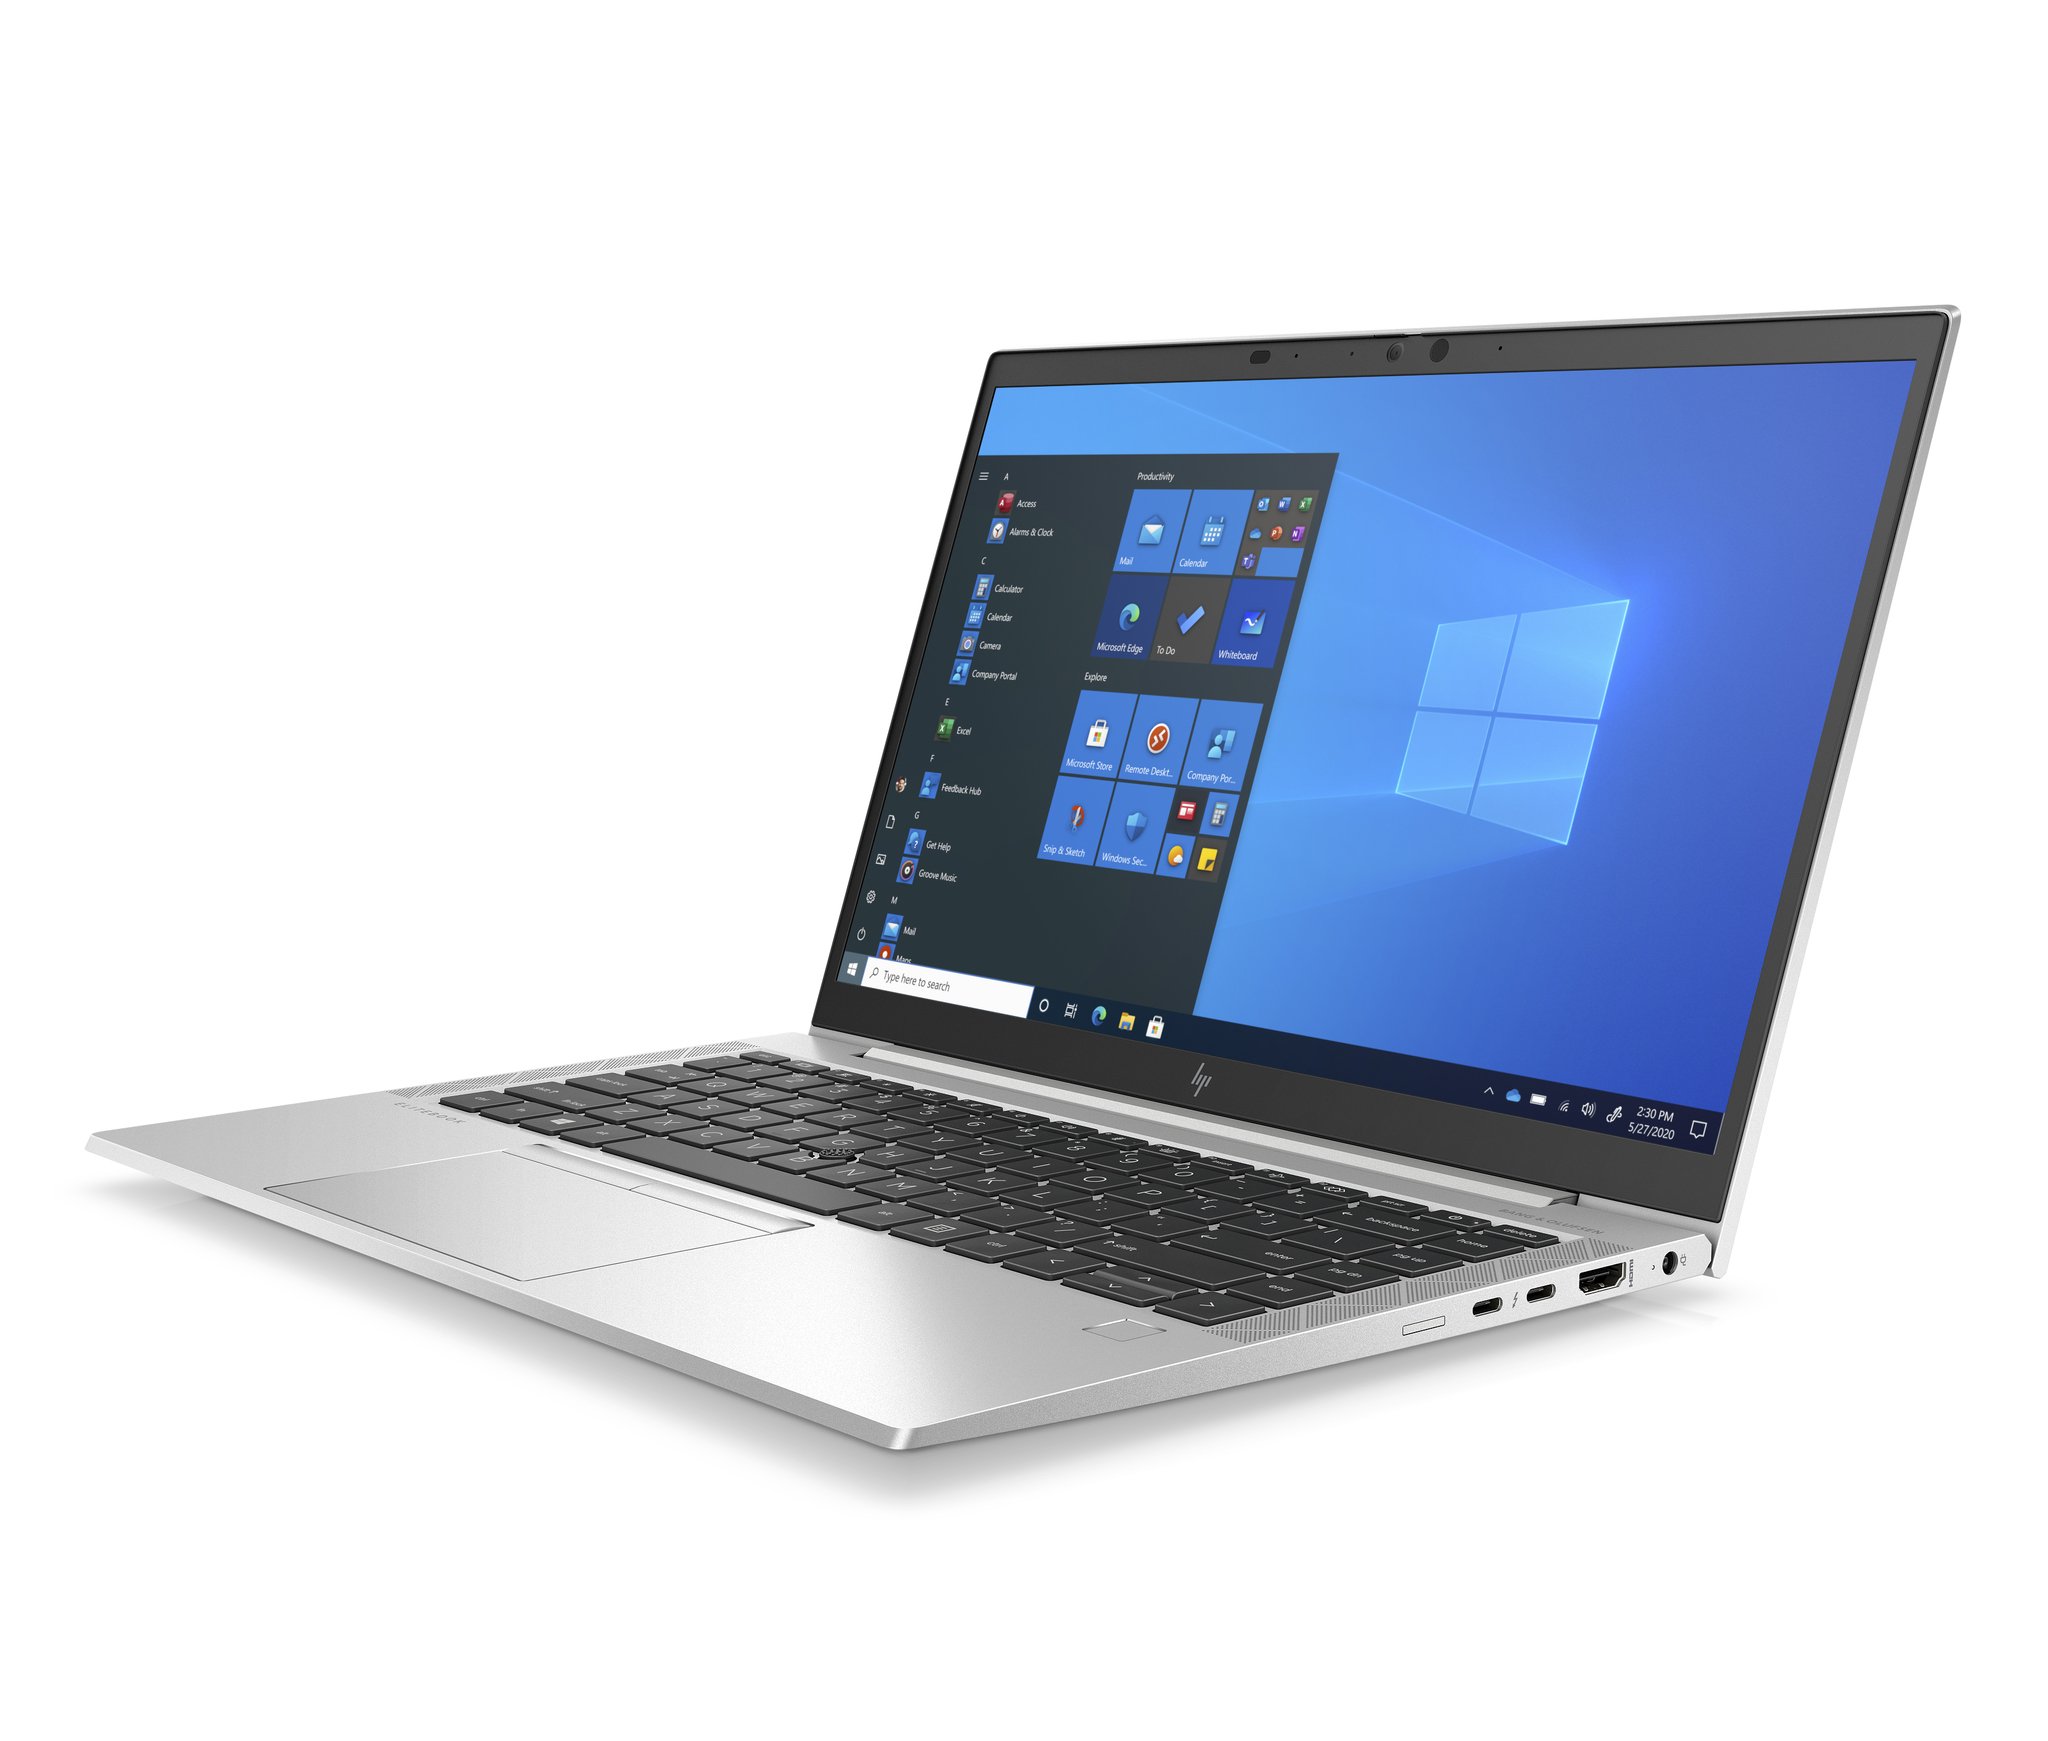 New HP EliteBook laptops bring 5G support and 11th Gen Intel vPro chips | Windows Central